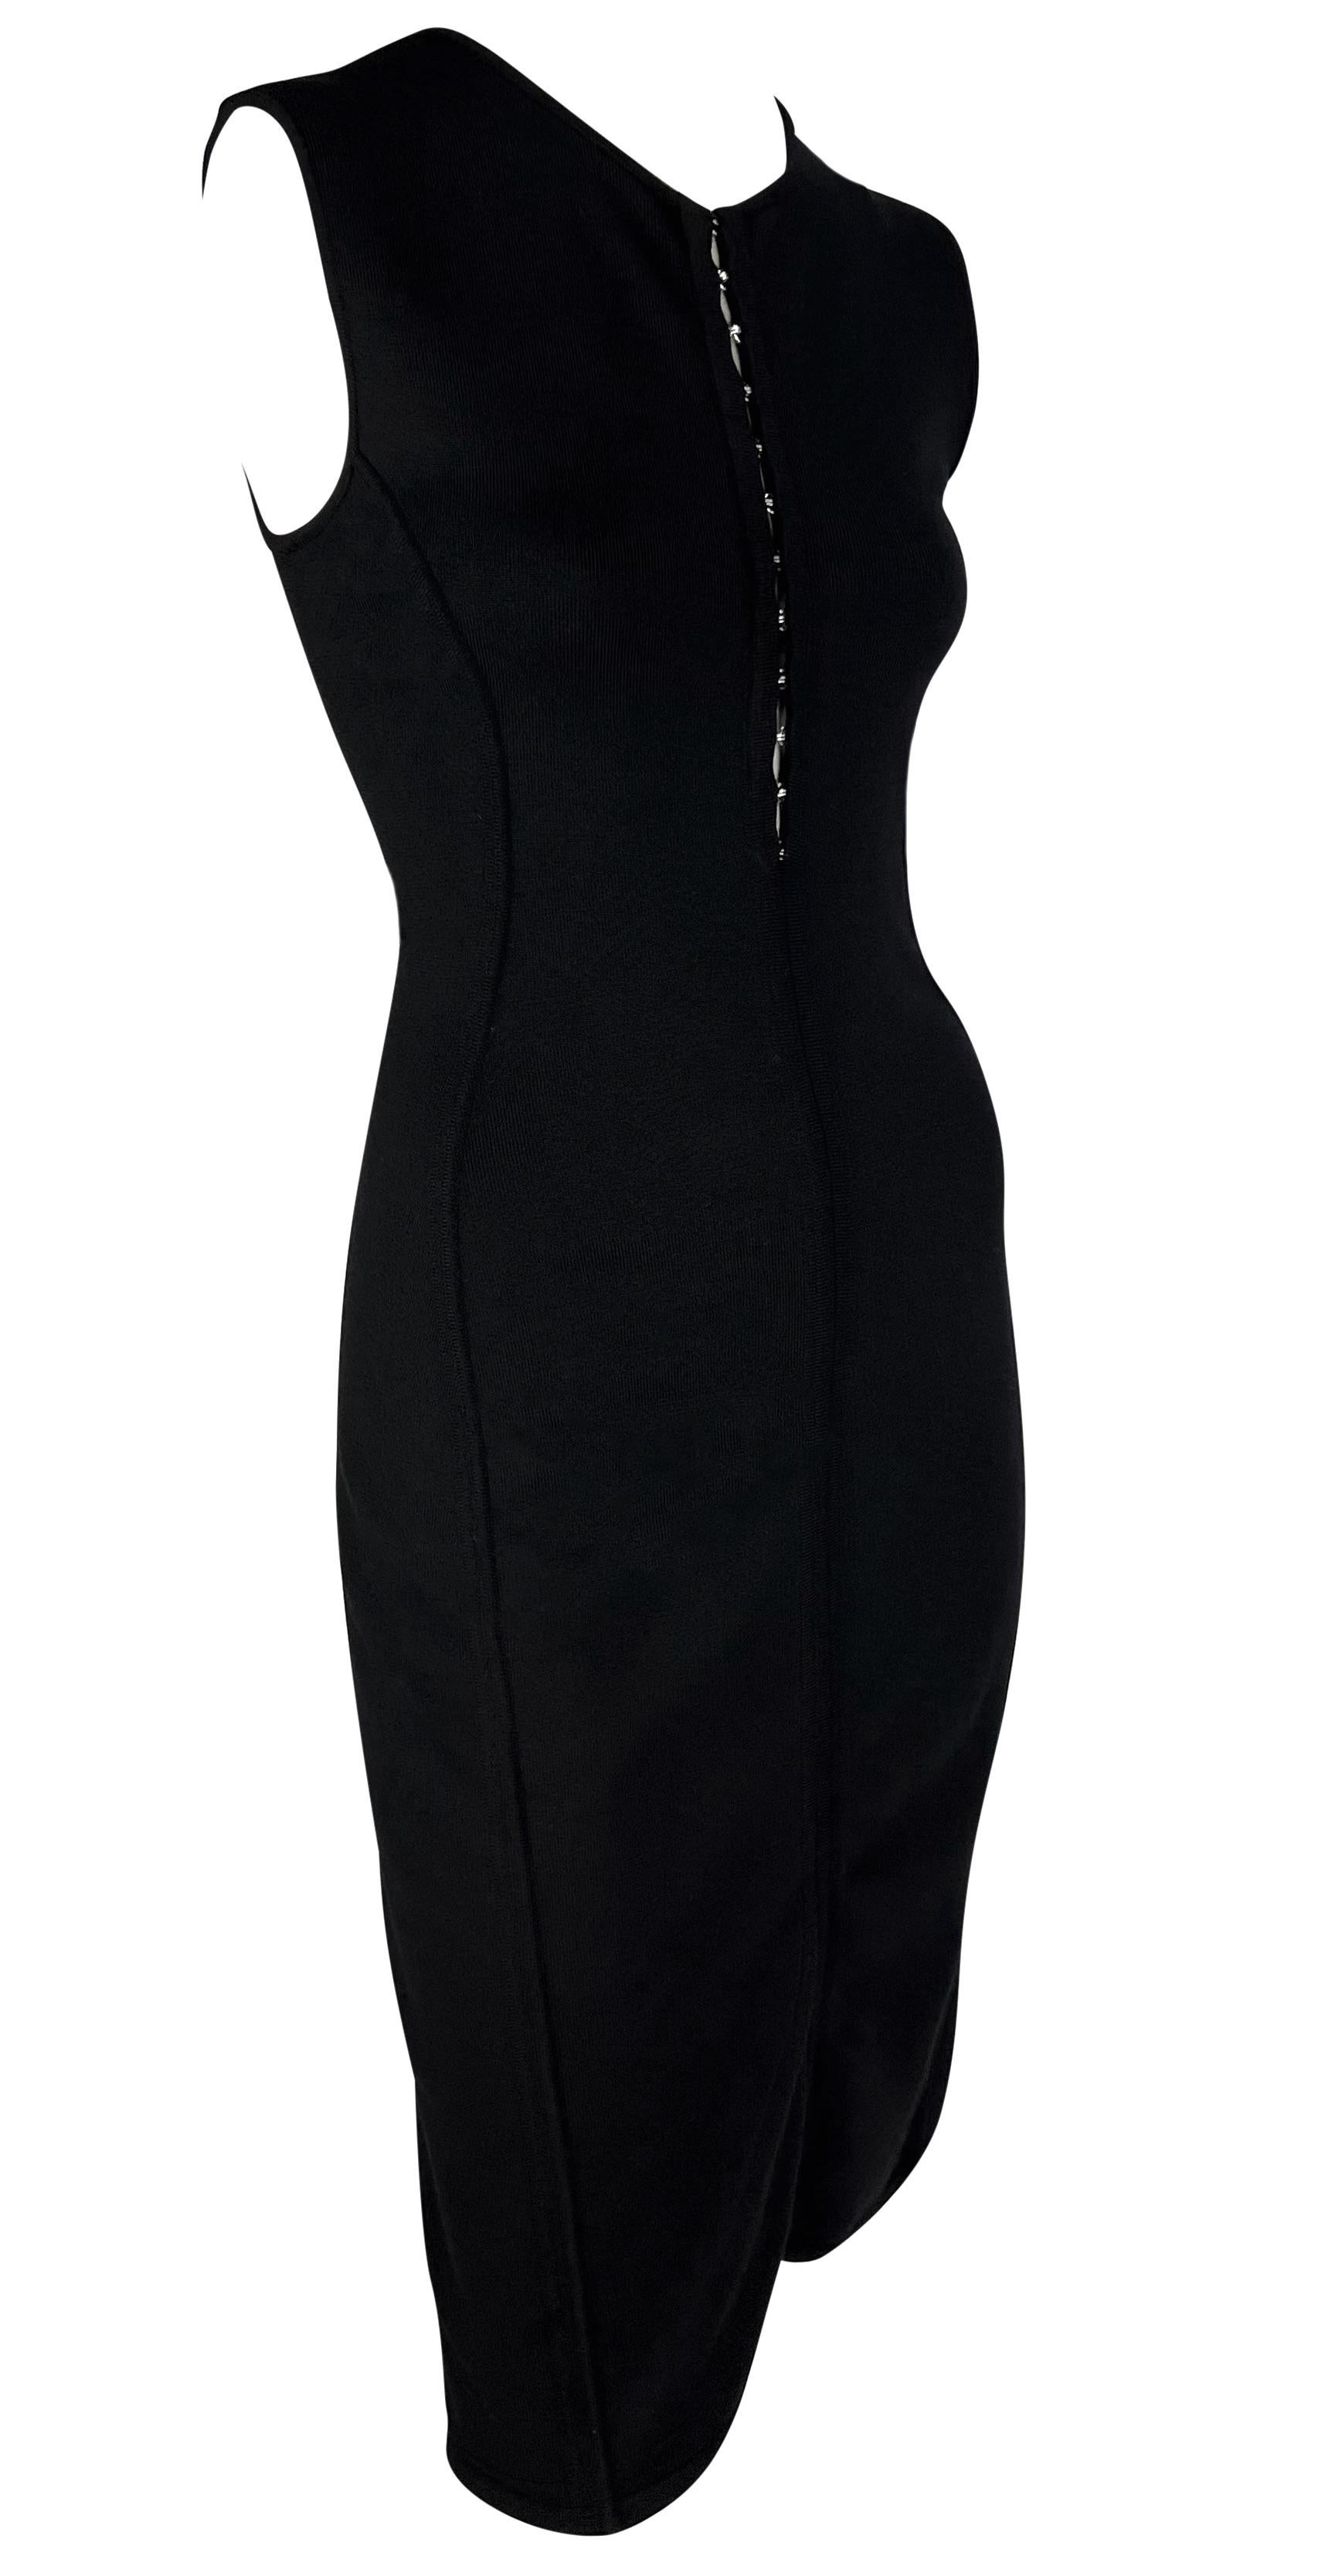 S/S 2002 Gianni Versace by Donatella Black Bodycon Hook Eye Plunging Knit Dress For Sale 3